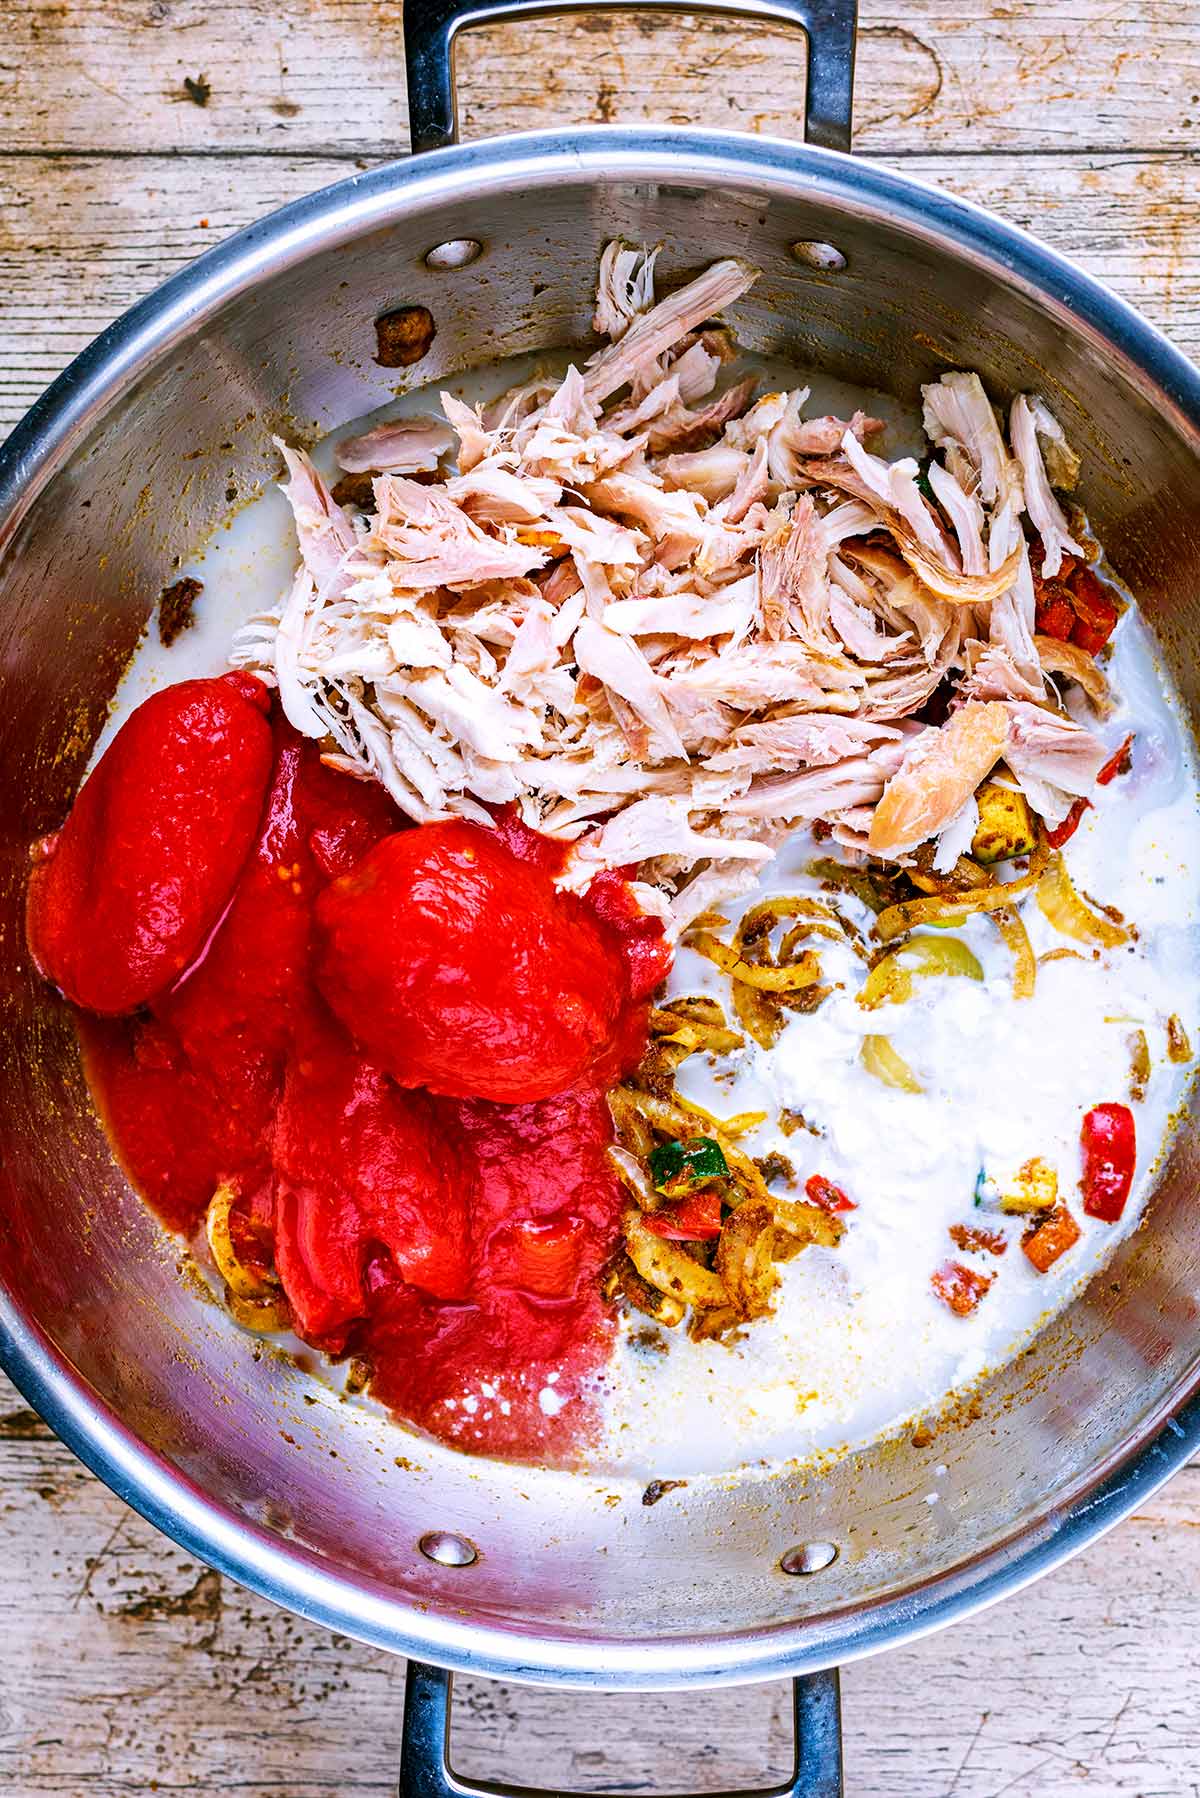 Tomatoes, shredded cooked turkey and coconut milk added to the pan.